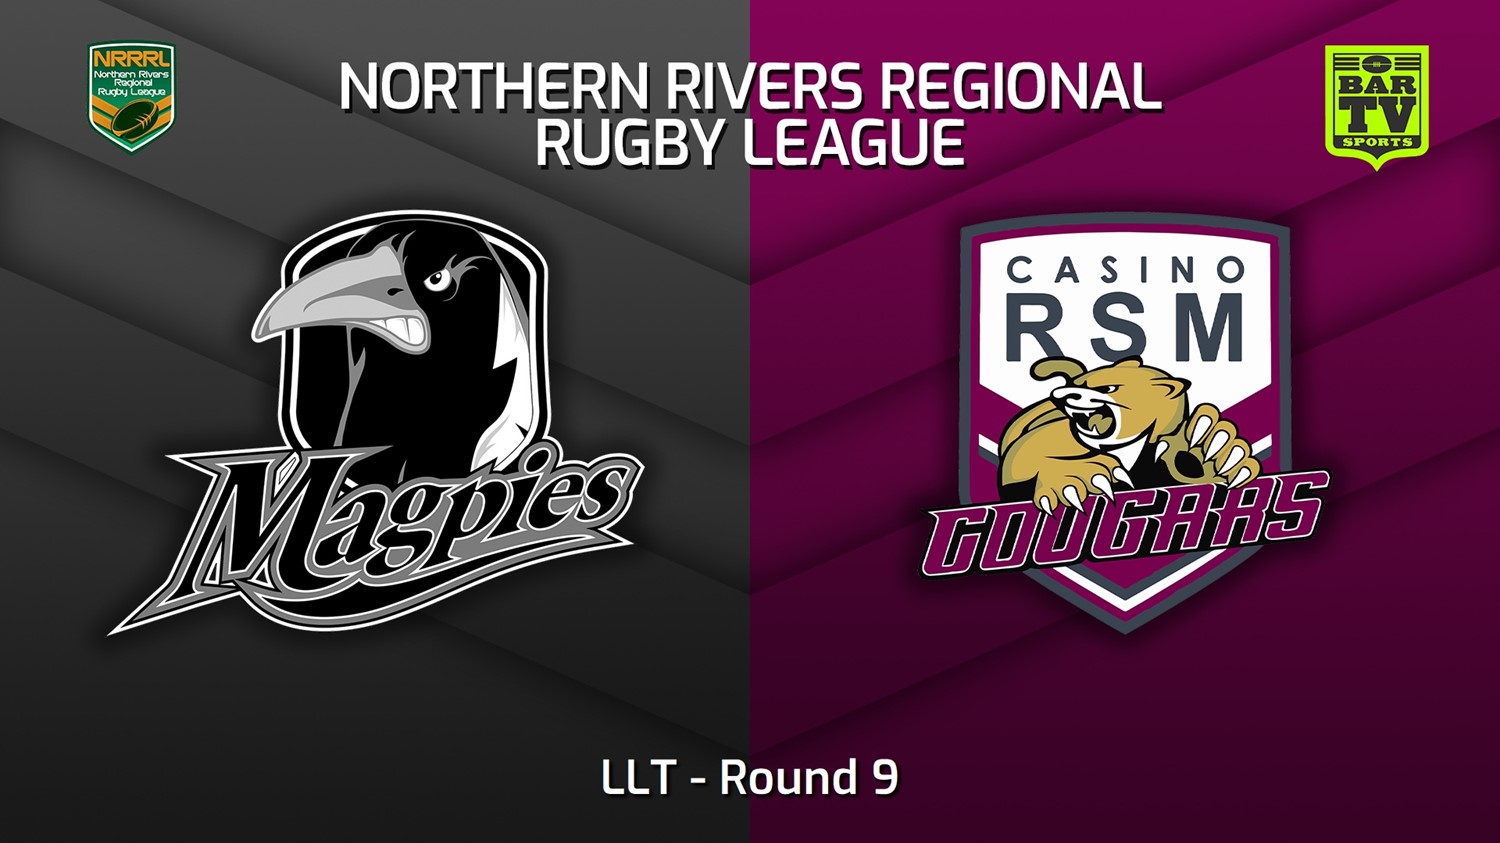 220626-Northern Rivers Round 9 - LLT - Lower Clarence Magpies v Casino RSM Cougars Slate Image